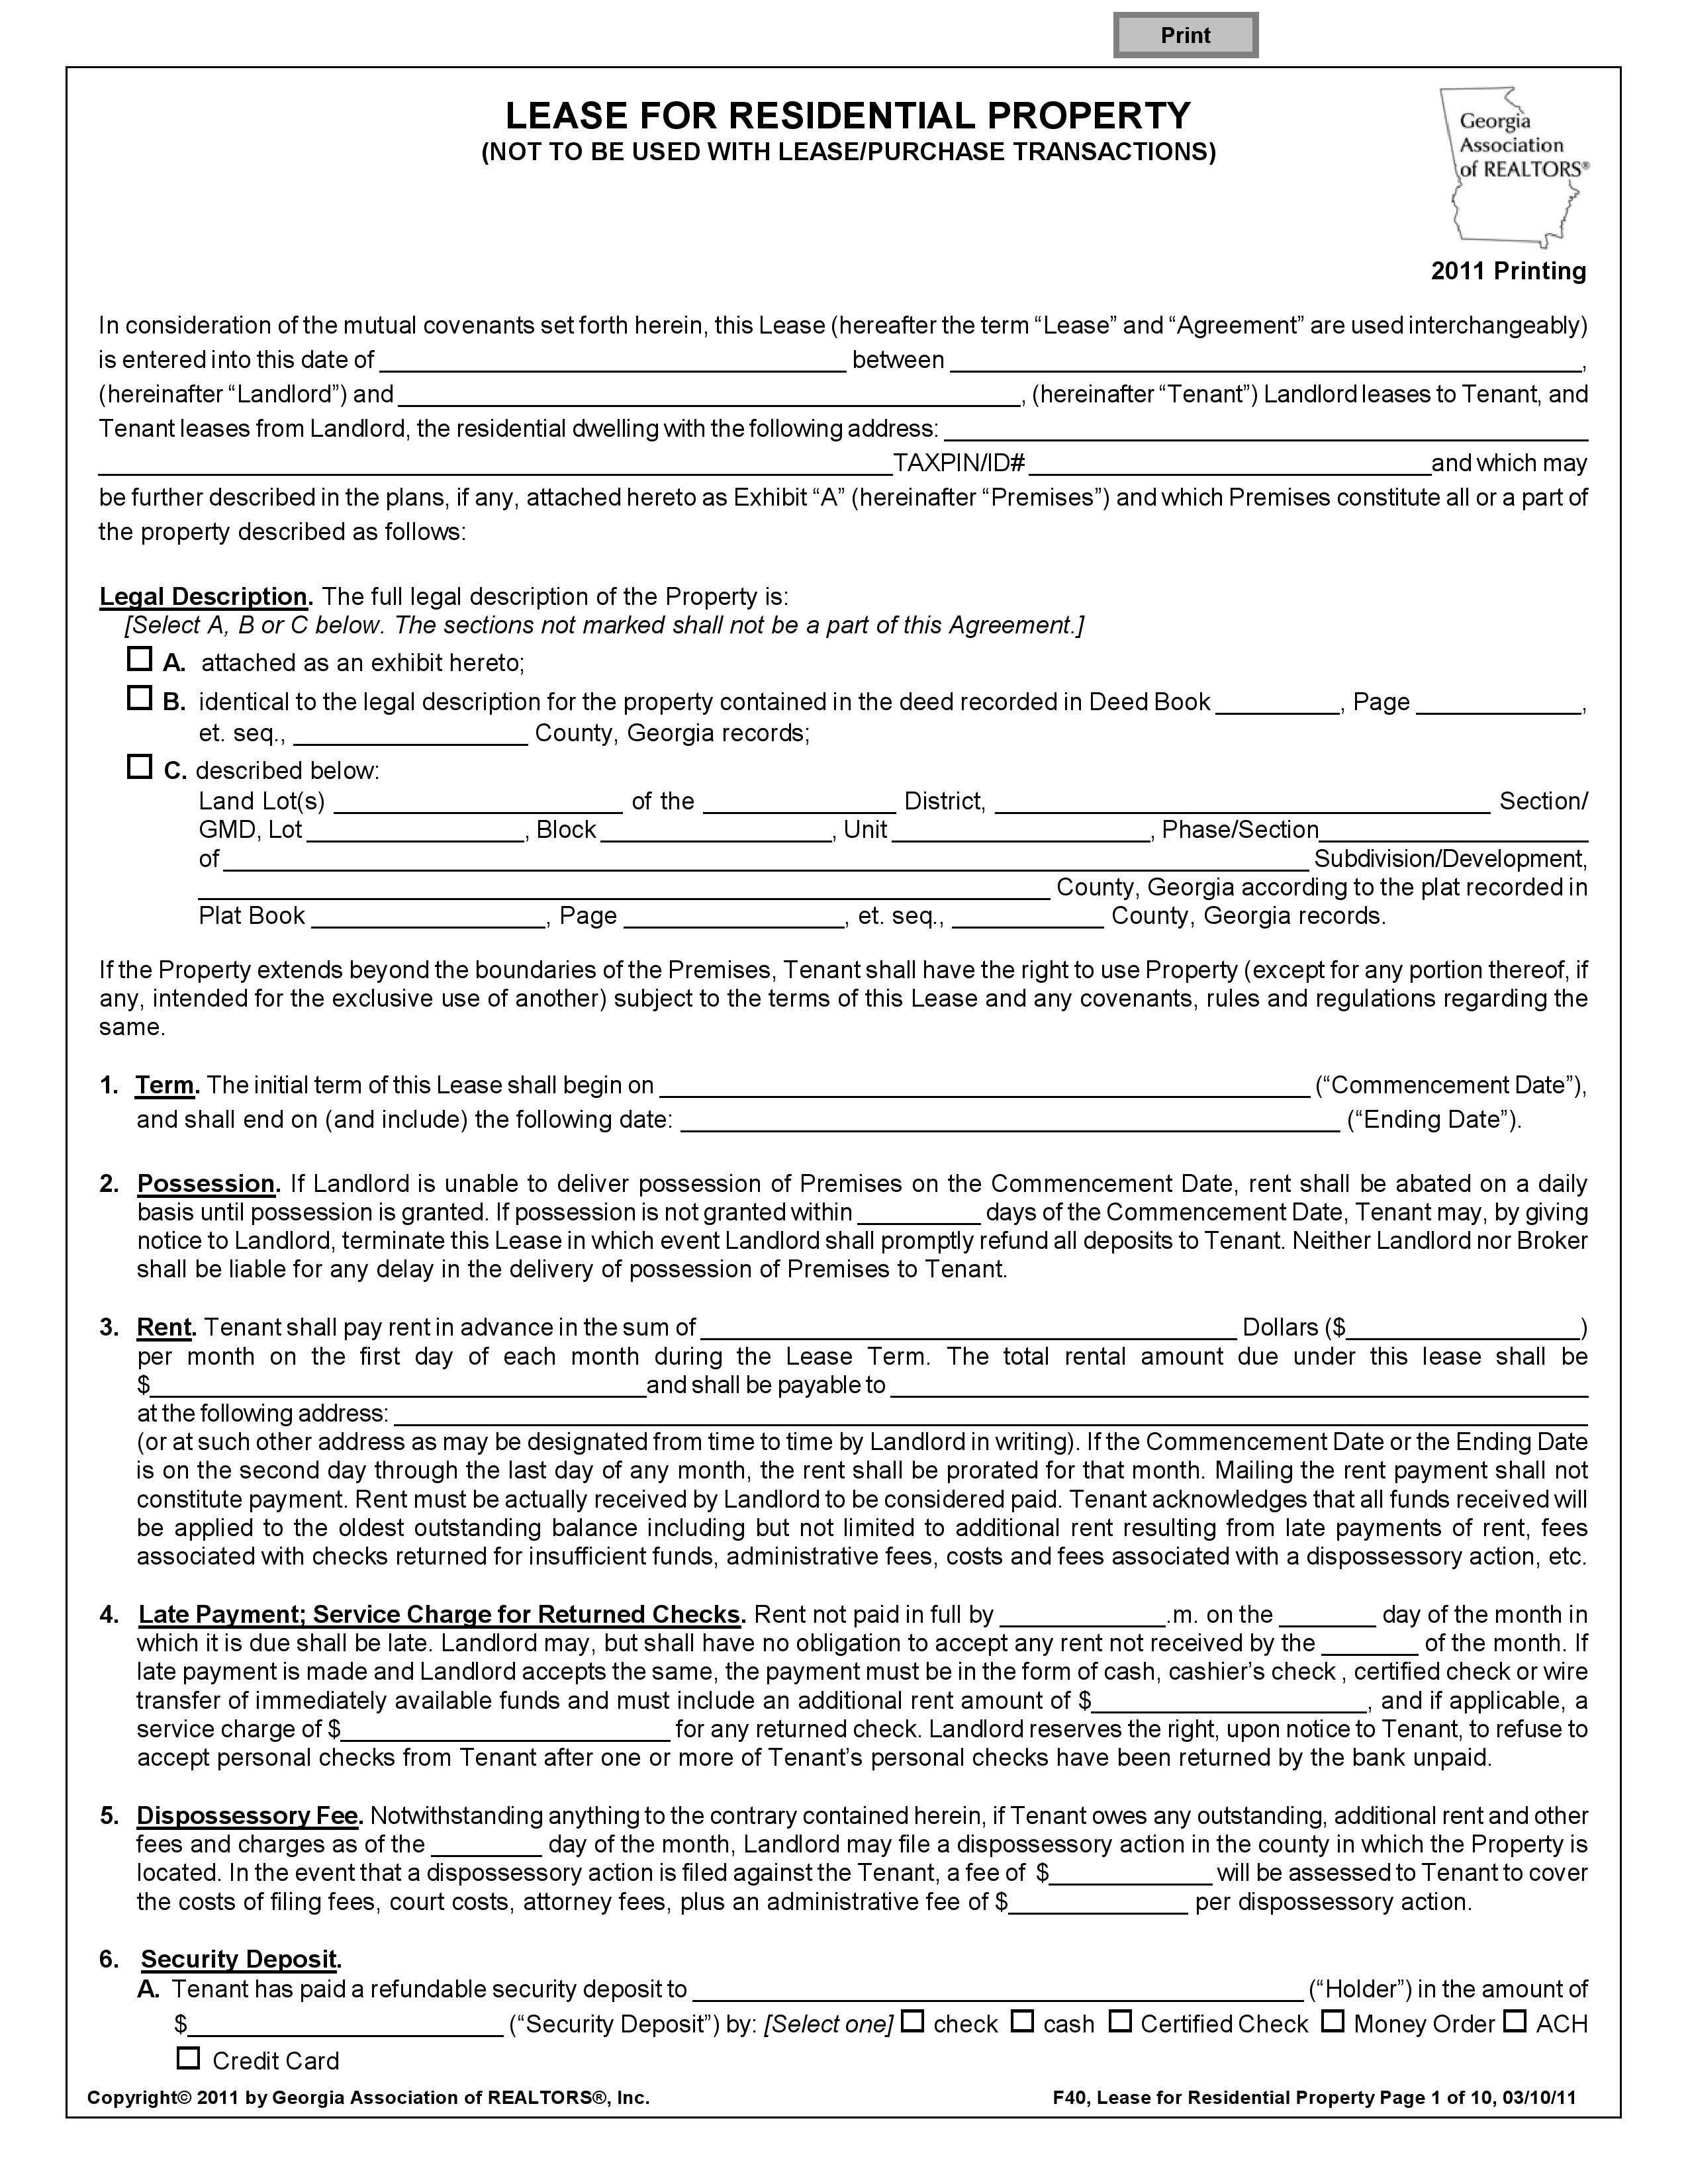 Residential Lease Agreement Doc Residential Lease Agreement Template Free Download Blank Rental